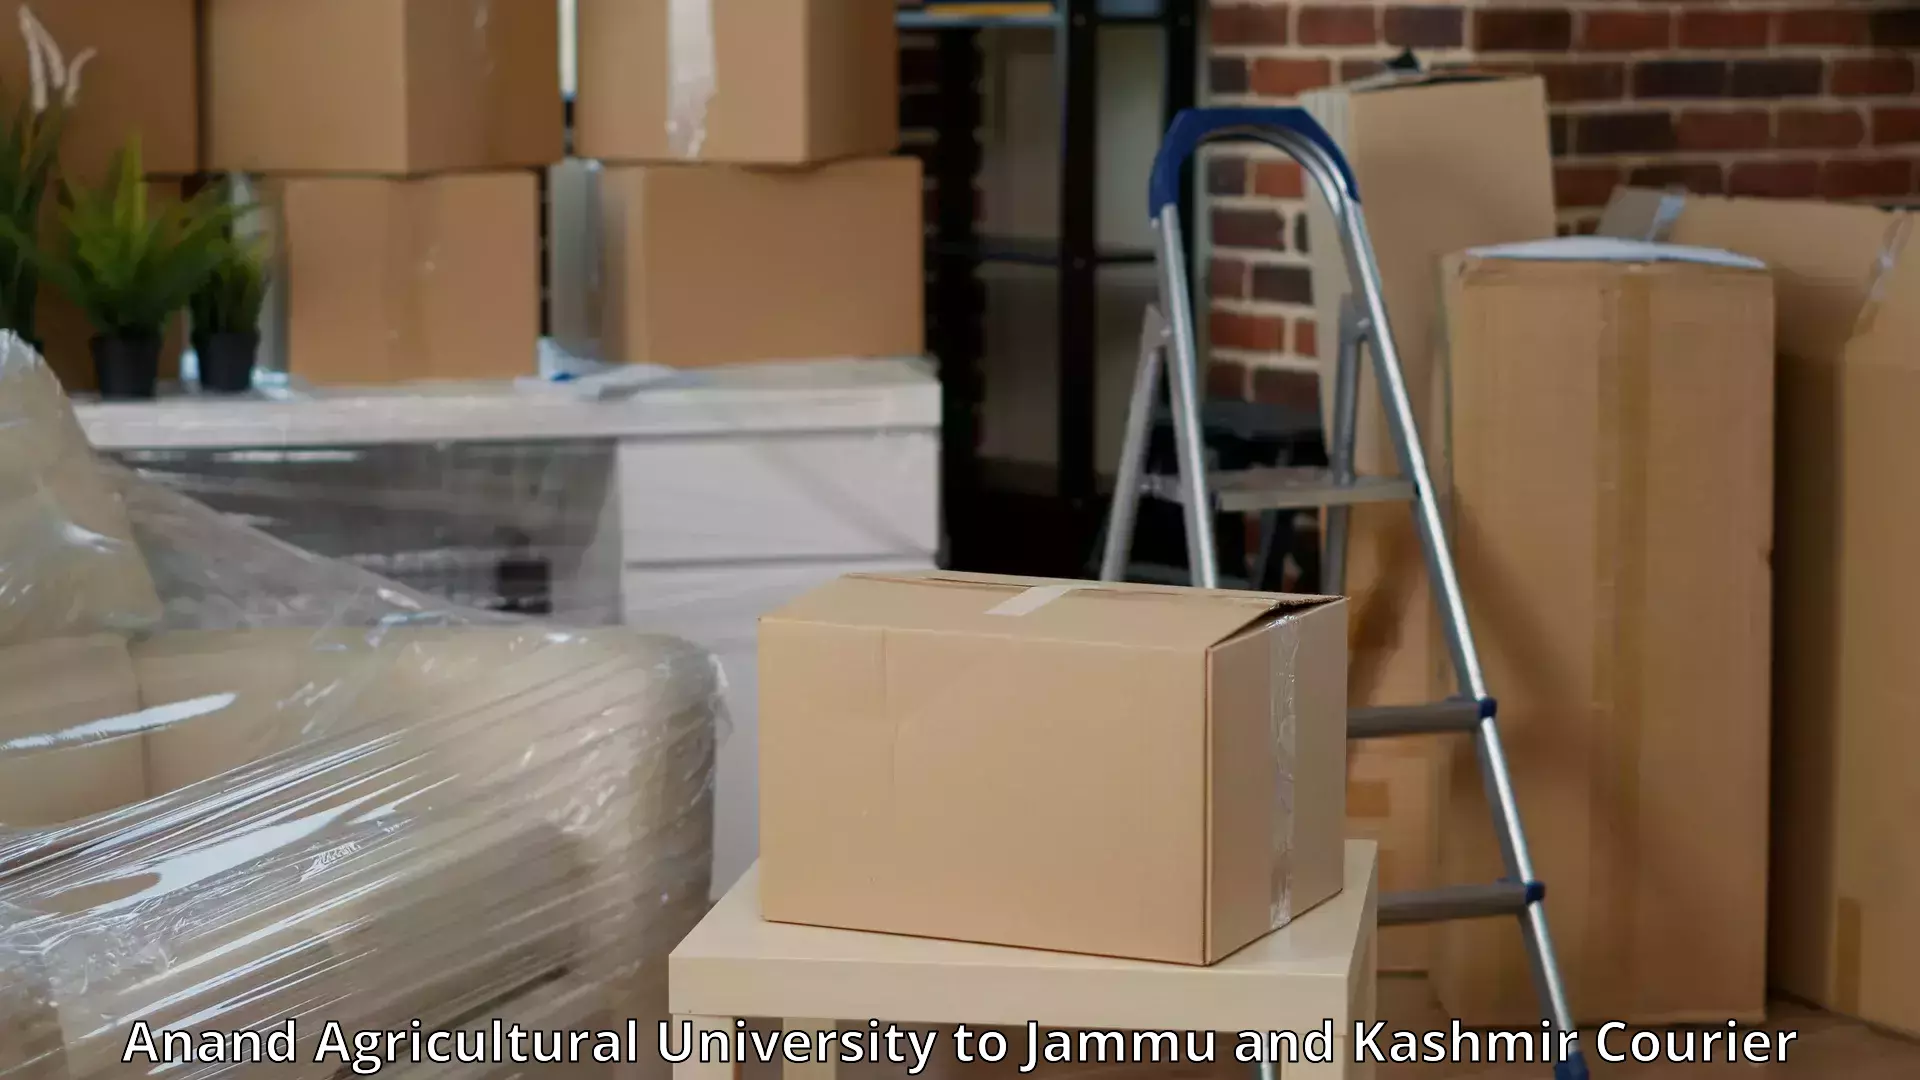 Furniture moving assistance Anand Agricultural University to Rajouri